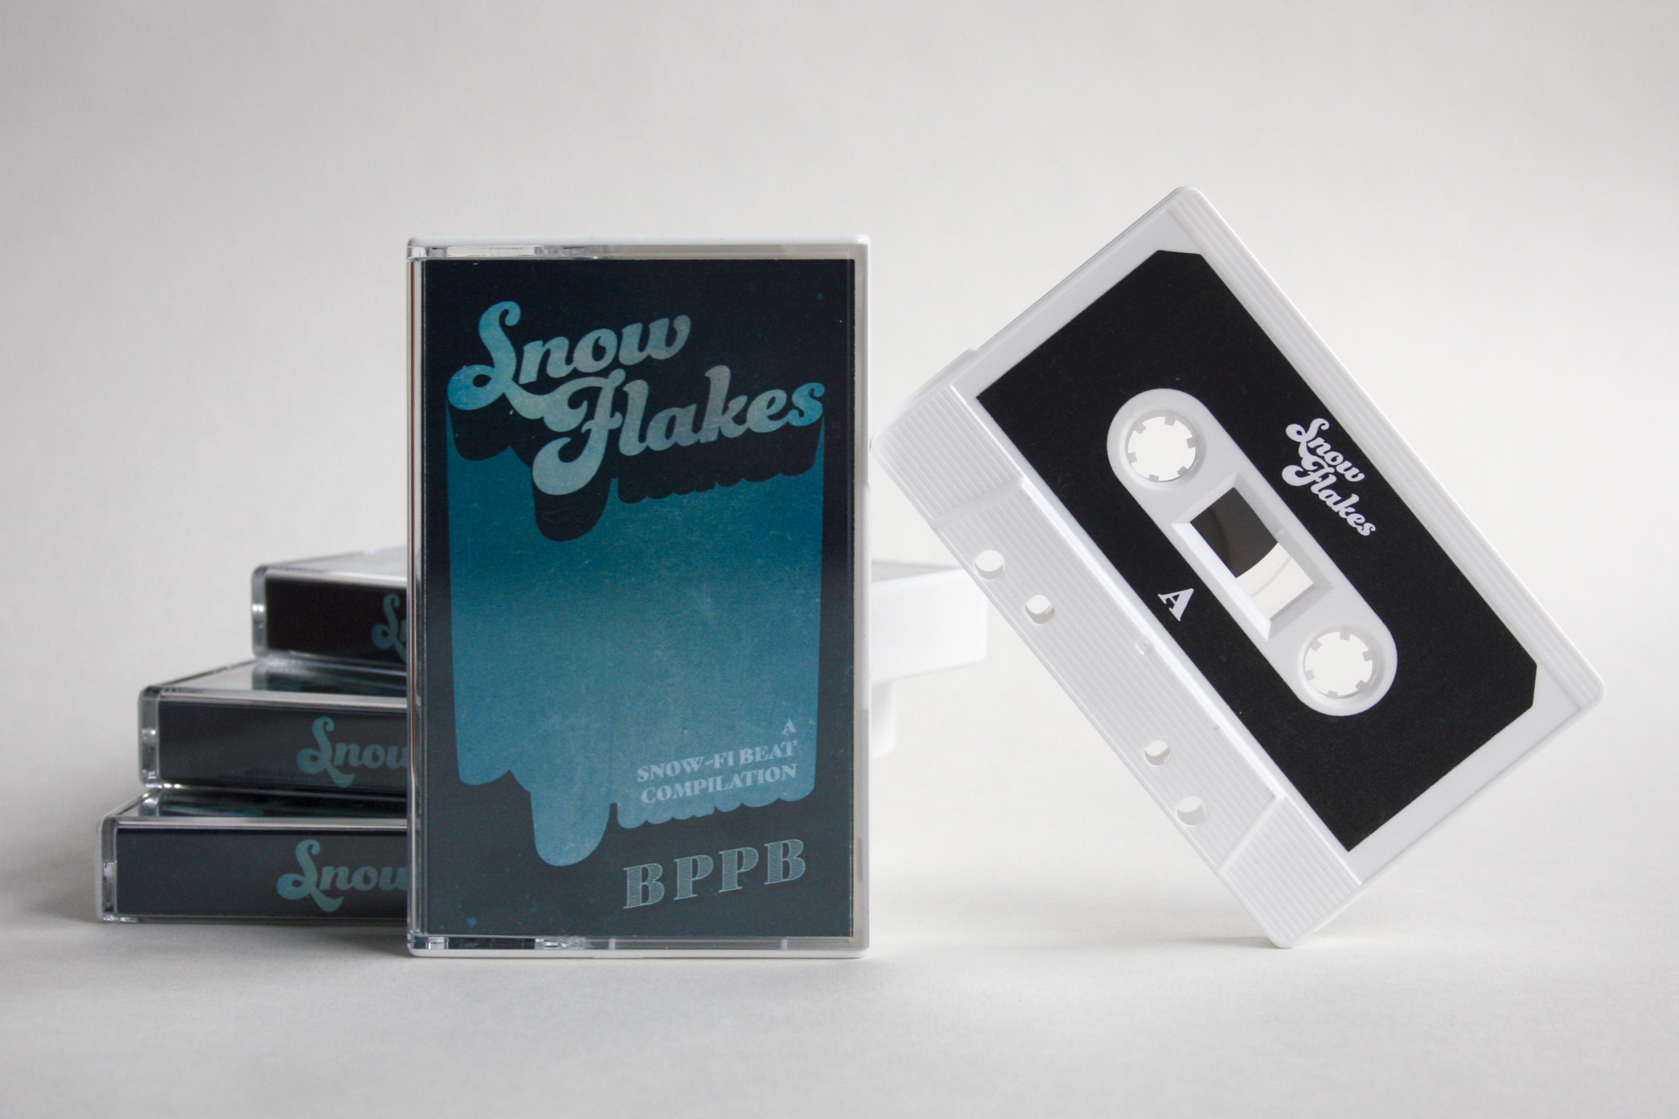 Snow Flakes - Bedroomproducers Paderborn Tape mit Case